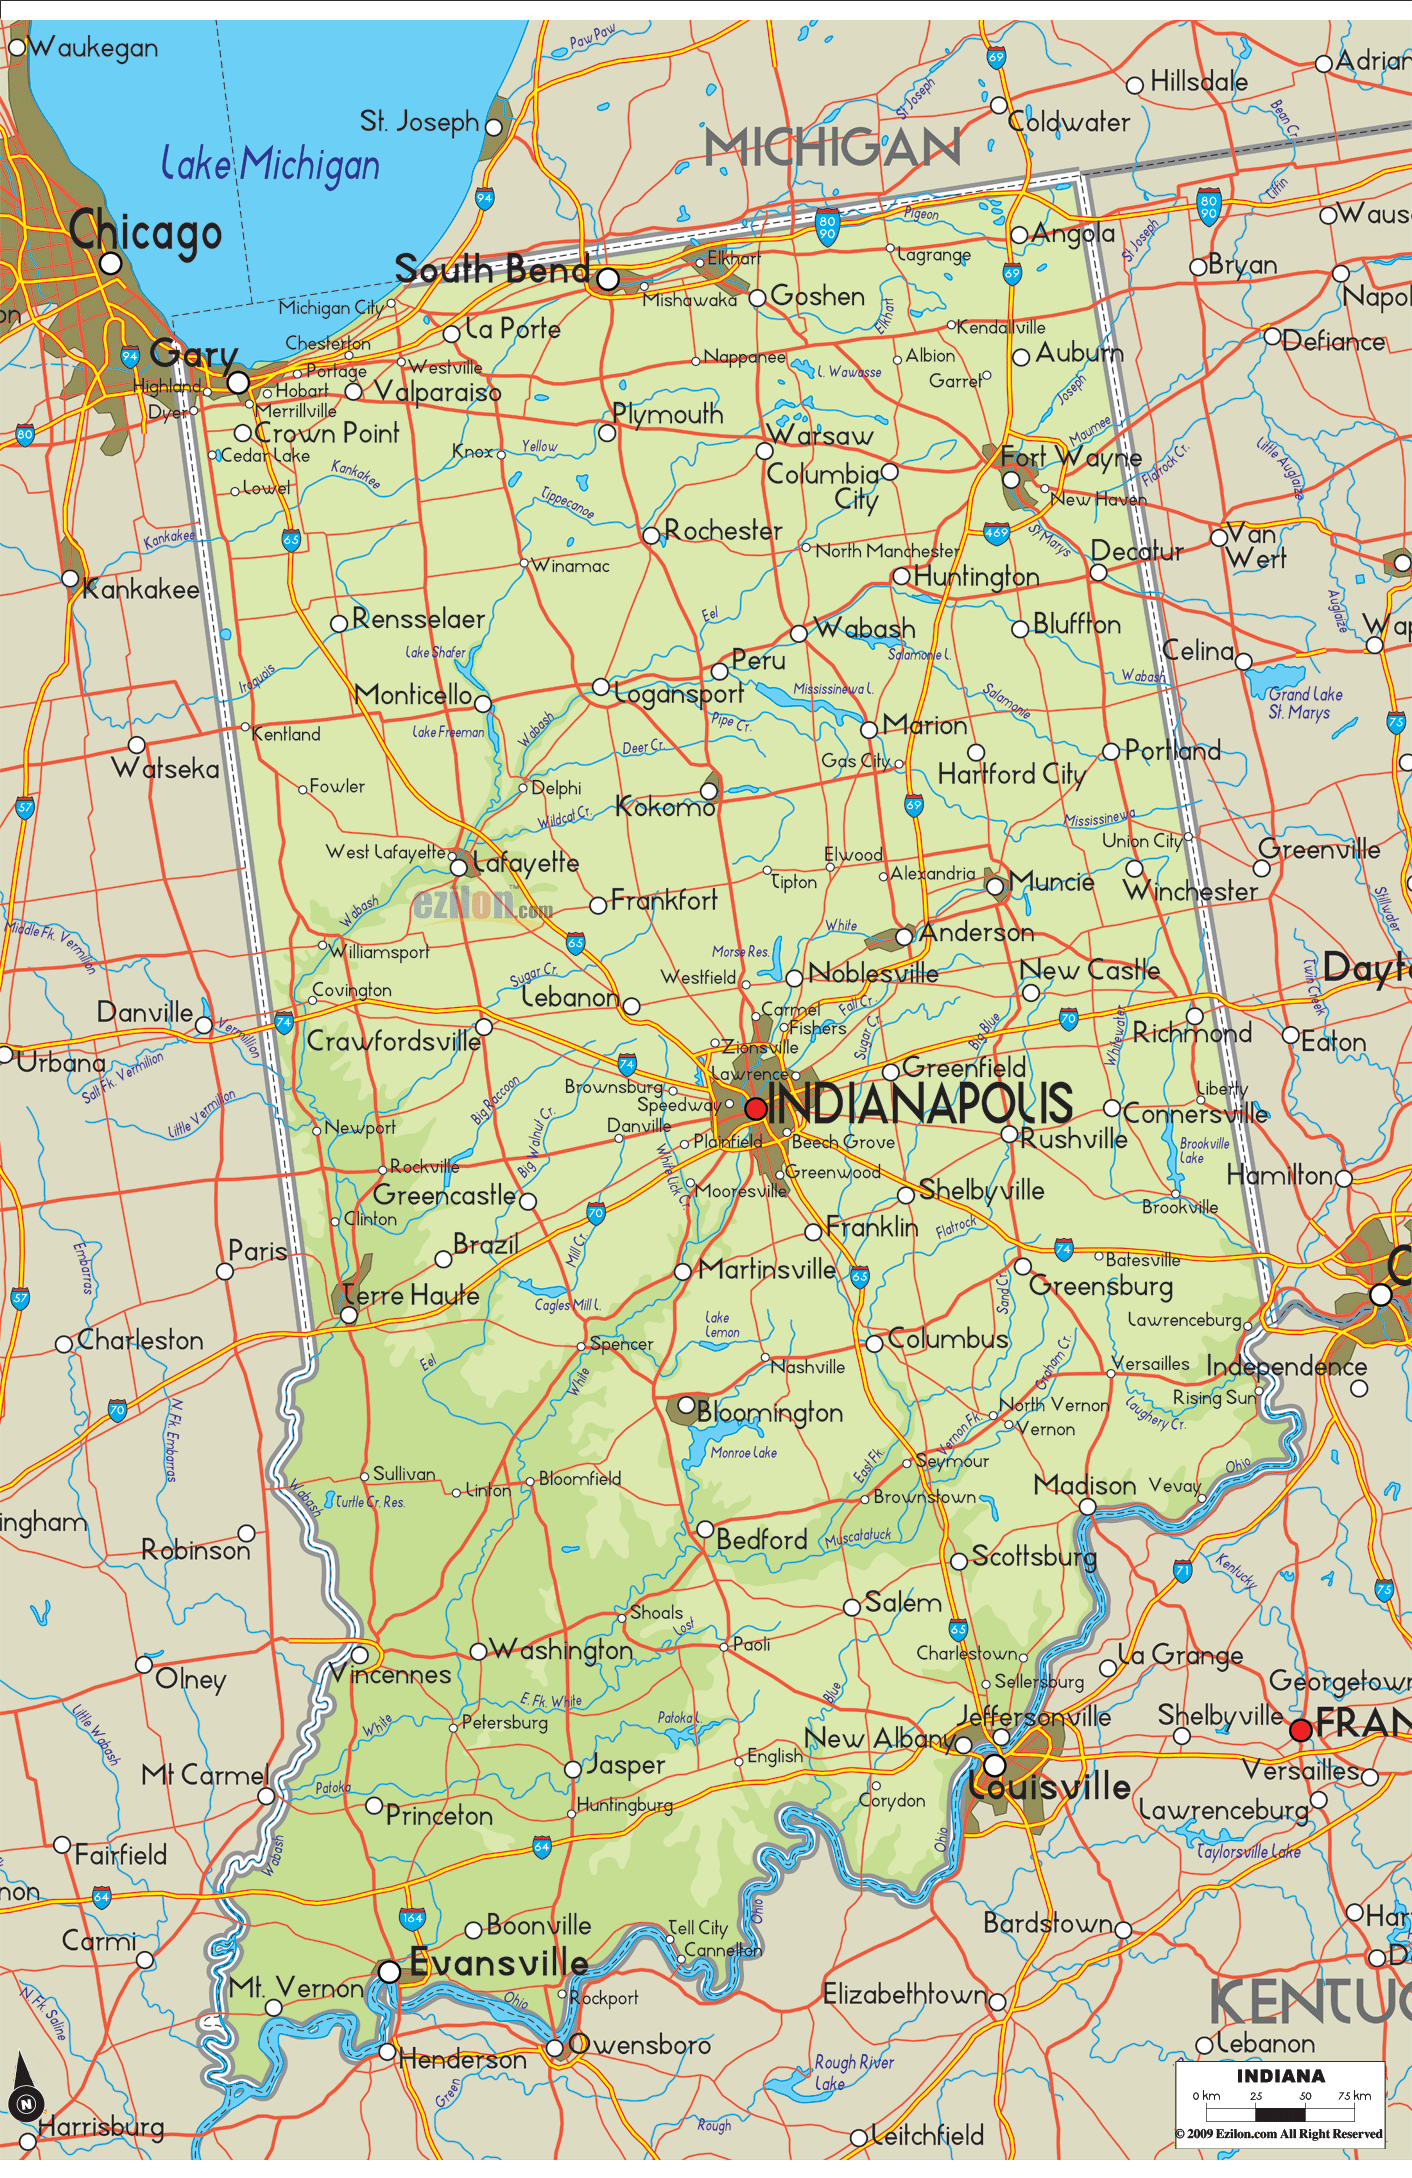 Detailed physical map of Indiana State, USA showing major geographical features such as rivers, lakes, topography, vegetations and land formations.